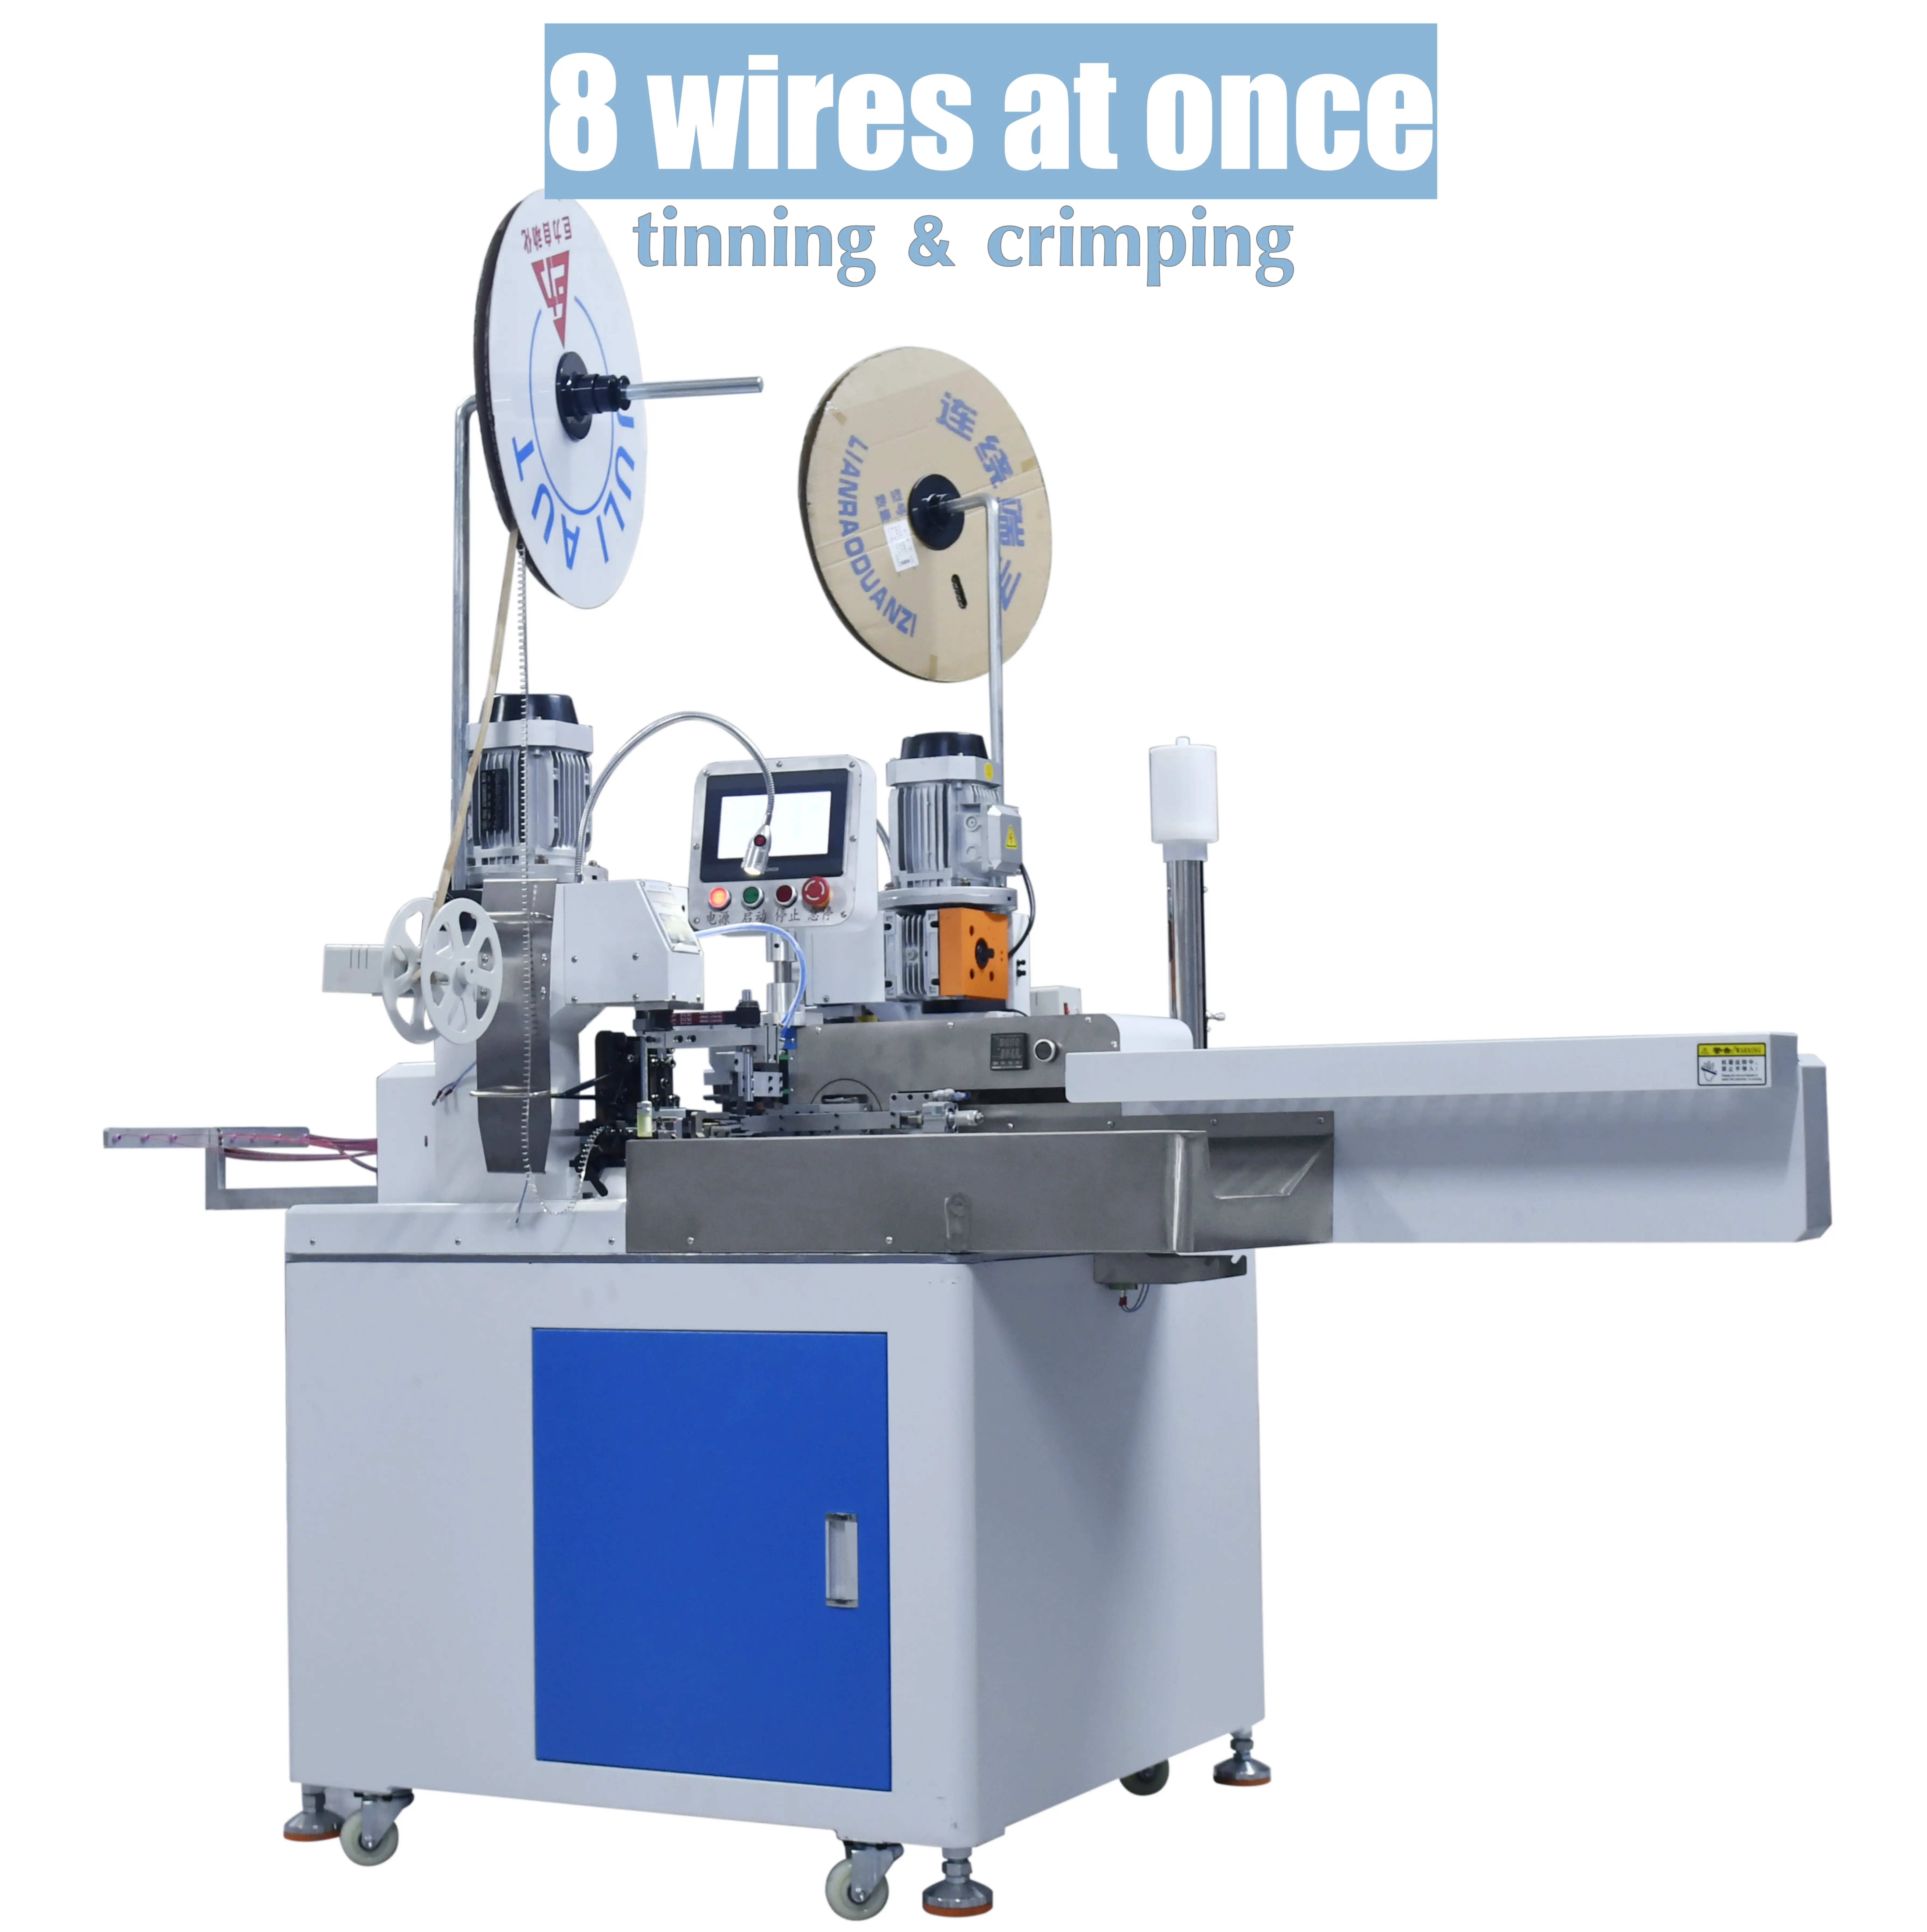 8 wires terminal crimping tinning machine automatic cable cutting stripping double head wire crimp single head dip tin machine